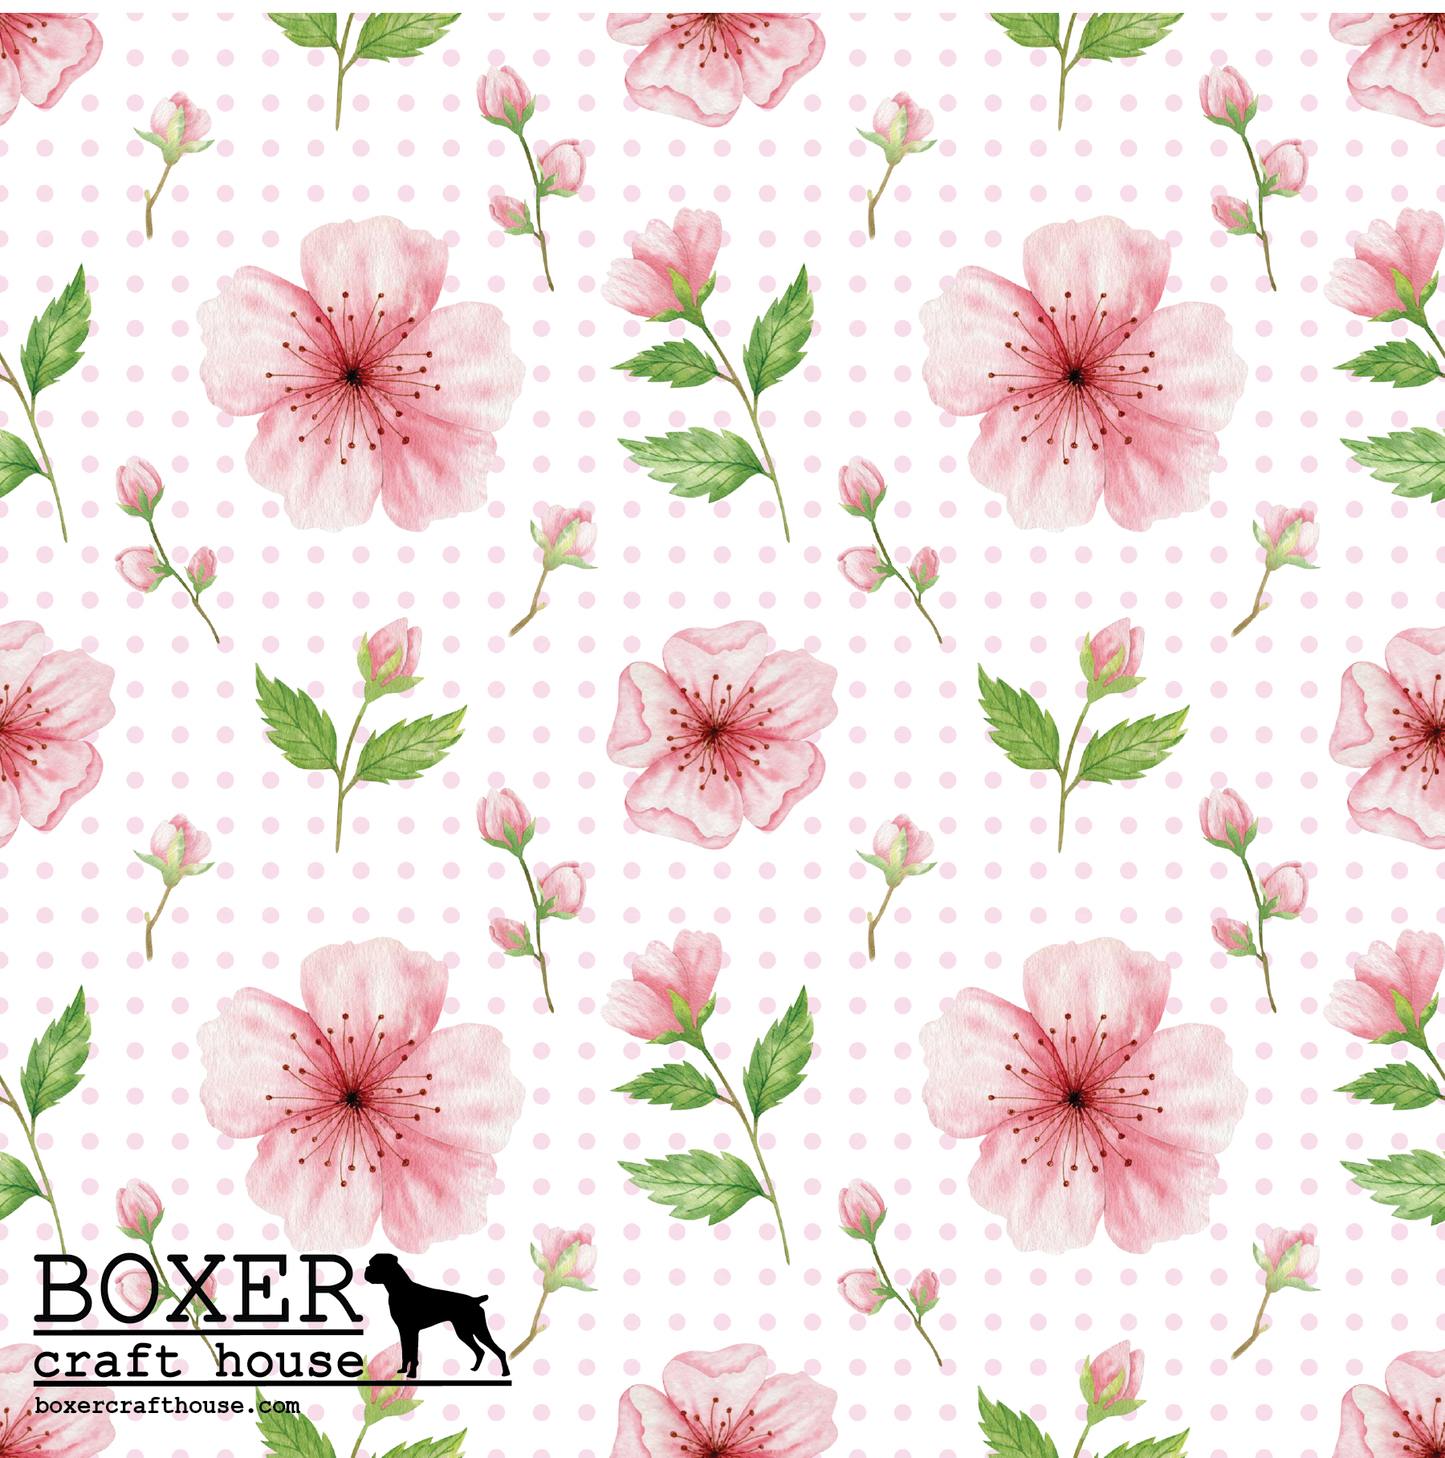 Cherry Blossom Faux Leather, Embroidery Vinyl, Sewing Faux Leather, Bag Making Supplies, Faux Leather For Embroidery, Quality Faux Leather, Embroidery Supplies, Sewing Supplies, Woman Owned Business, Craft Supply Store, USA, In the Hoop Supplies, Sewing with vinyl,Specialty Vinyl, Printed in the USA Faux Leather,Cherry Blossoms, Flowers, Cherry Blossom Embroidery Vinyl, Cherry Blossom Faux Leather